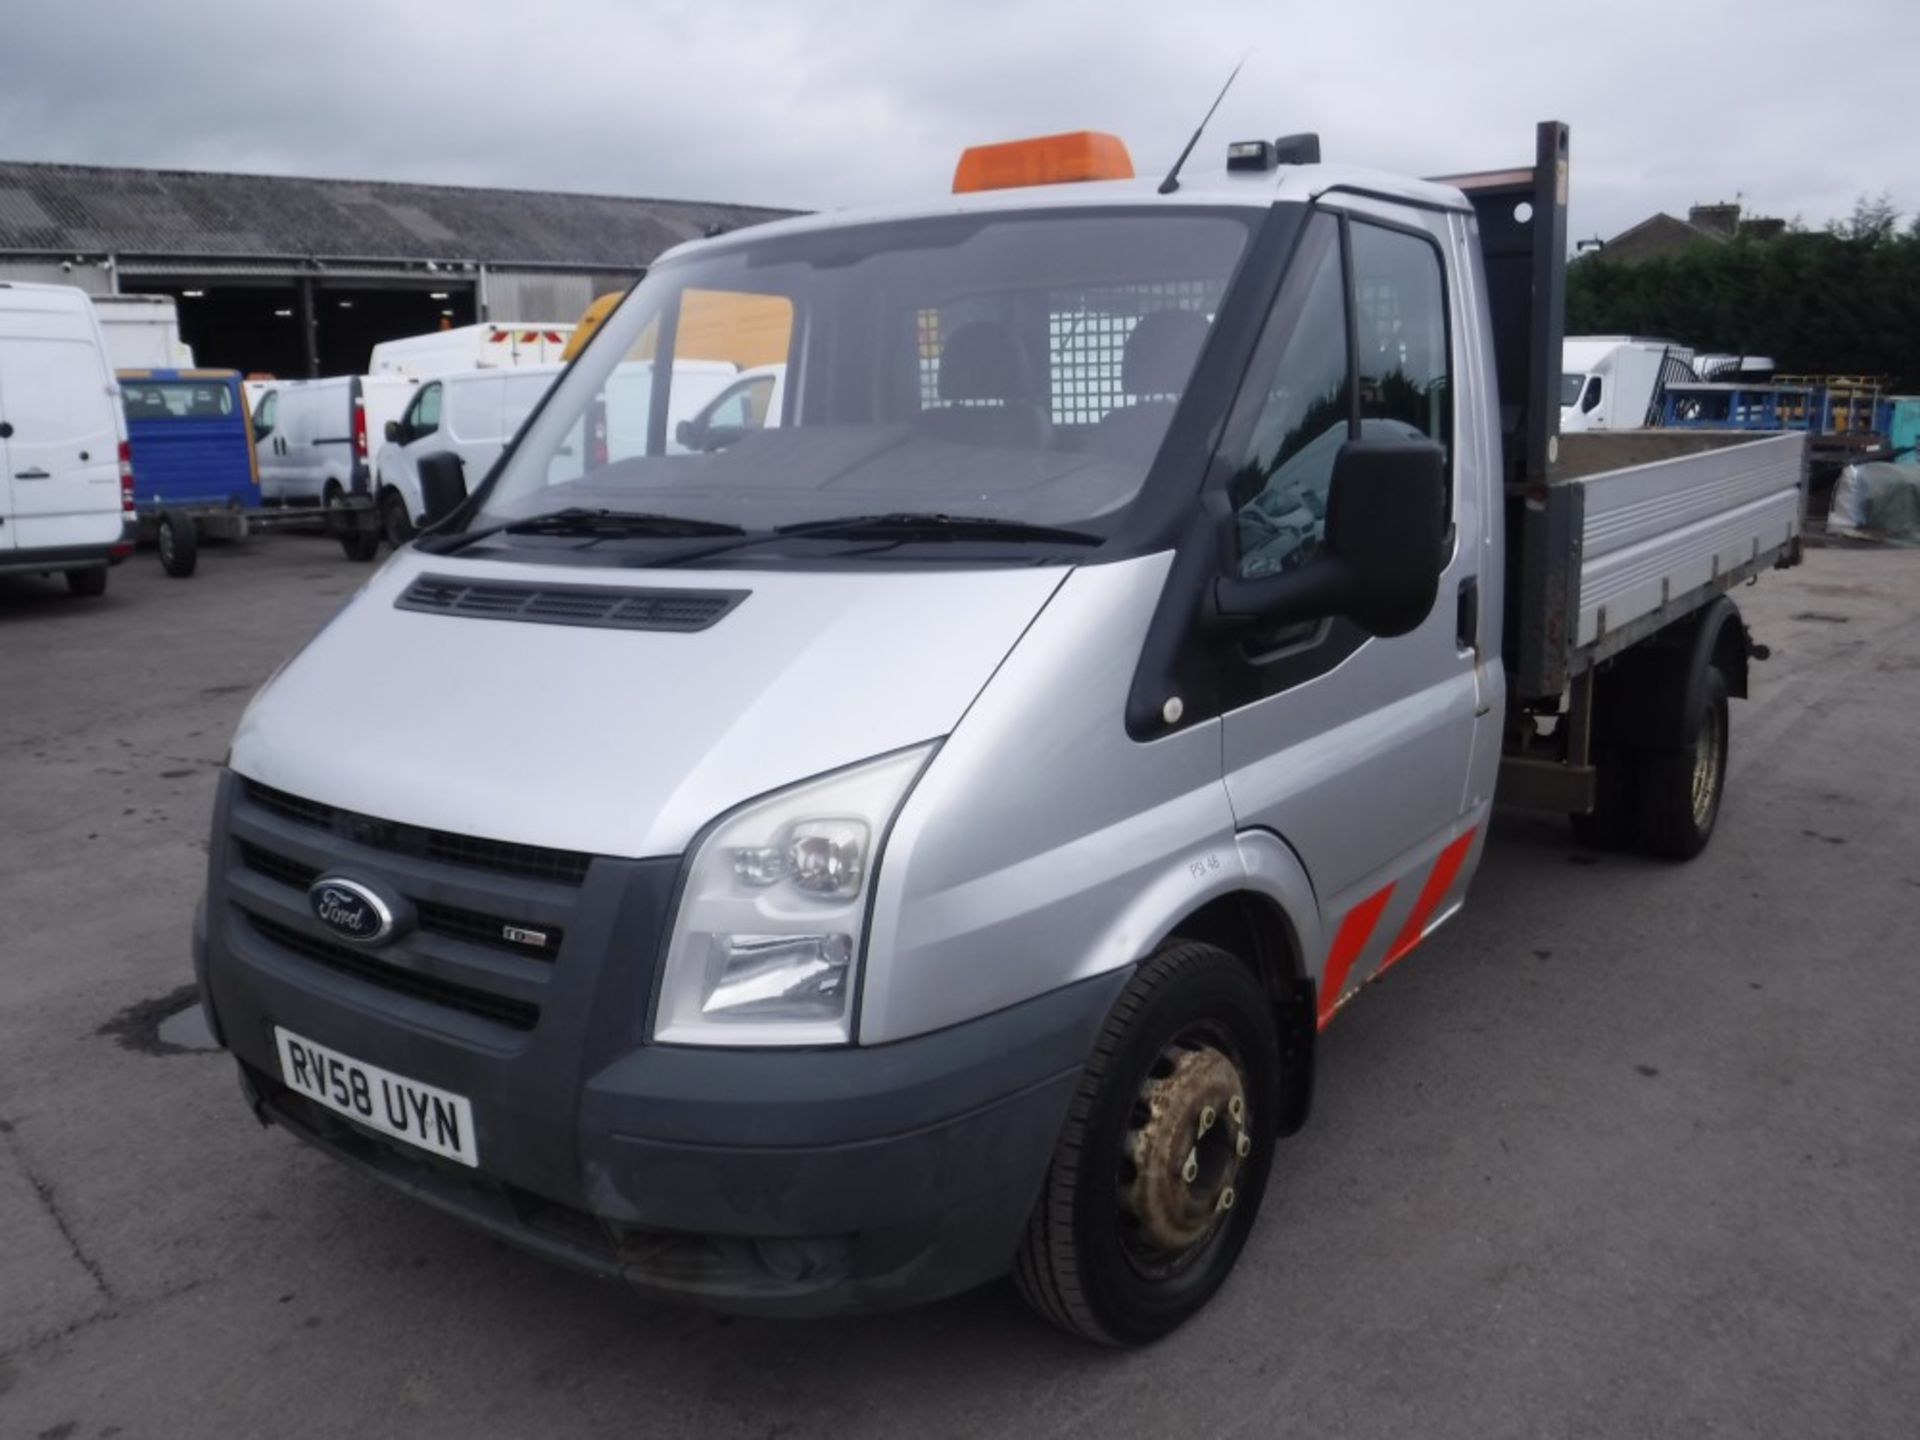 58 reg FORD TRANSIT 140 T350M RWD TIPPER, 1ST REG 11/08, 338463KM WARRANTED, V5 HERE, 1 OWNER FROM - Image 2 of 5